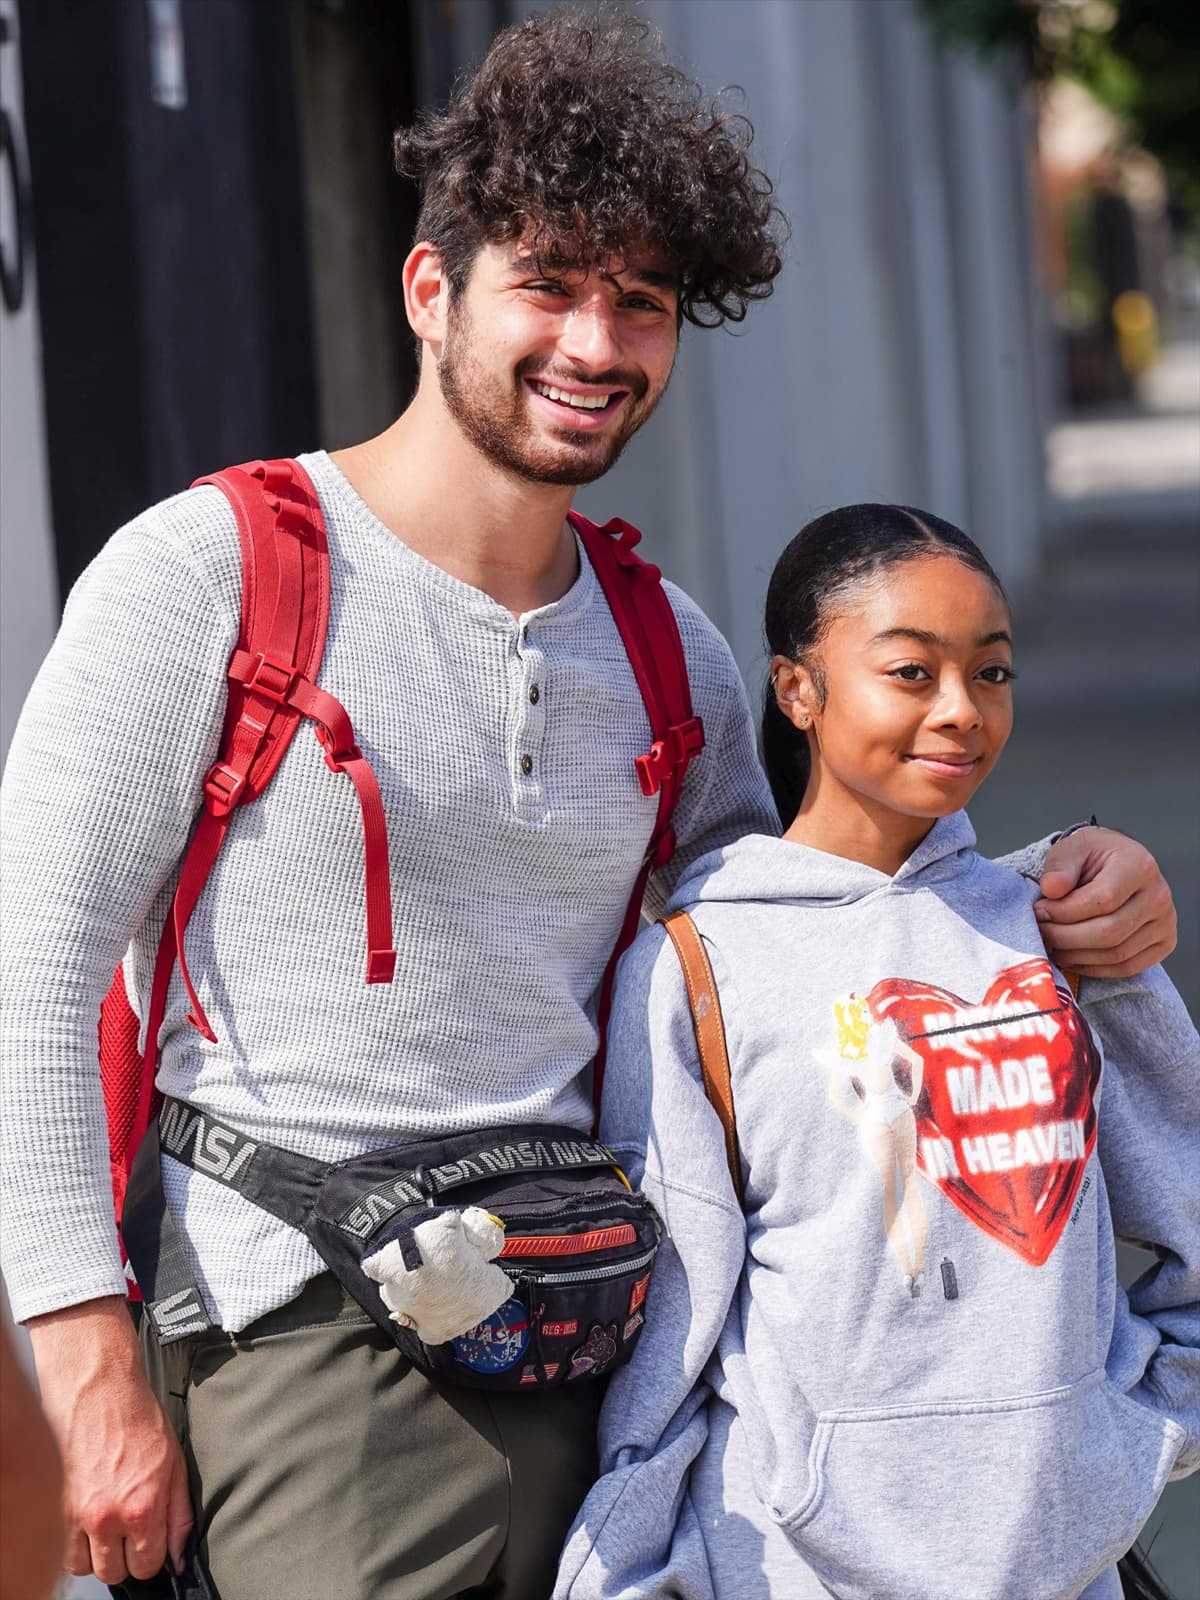 Skai Jackson, partnered with Alan Bersten, competed in the 29th season of Dancing with the Stars, premiering on September 14, 2020, and was eliminated in the semi-finals as the 10th contestant on November 16, 2020